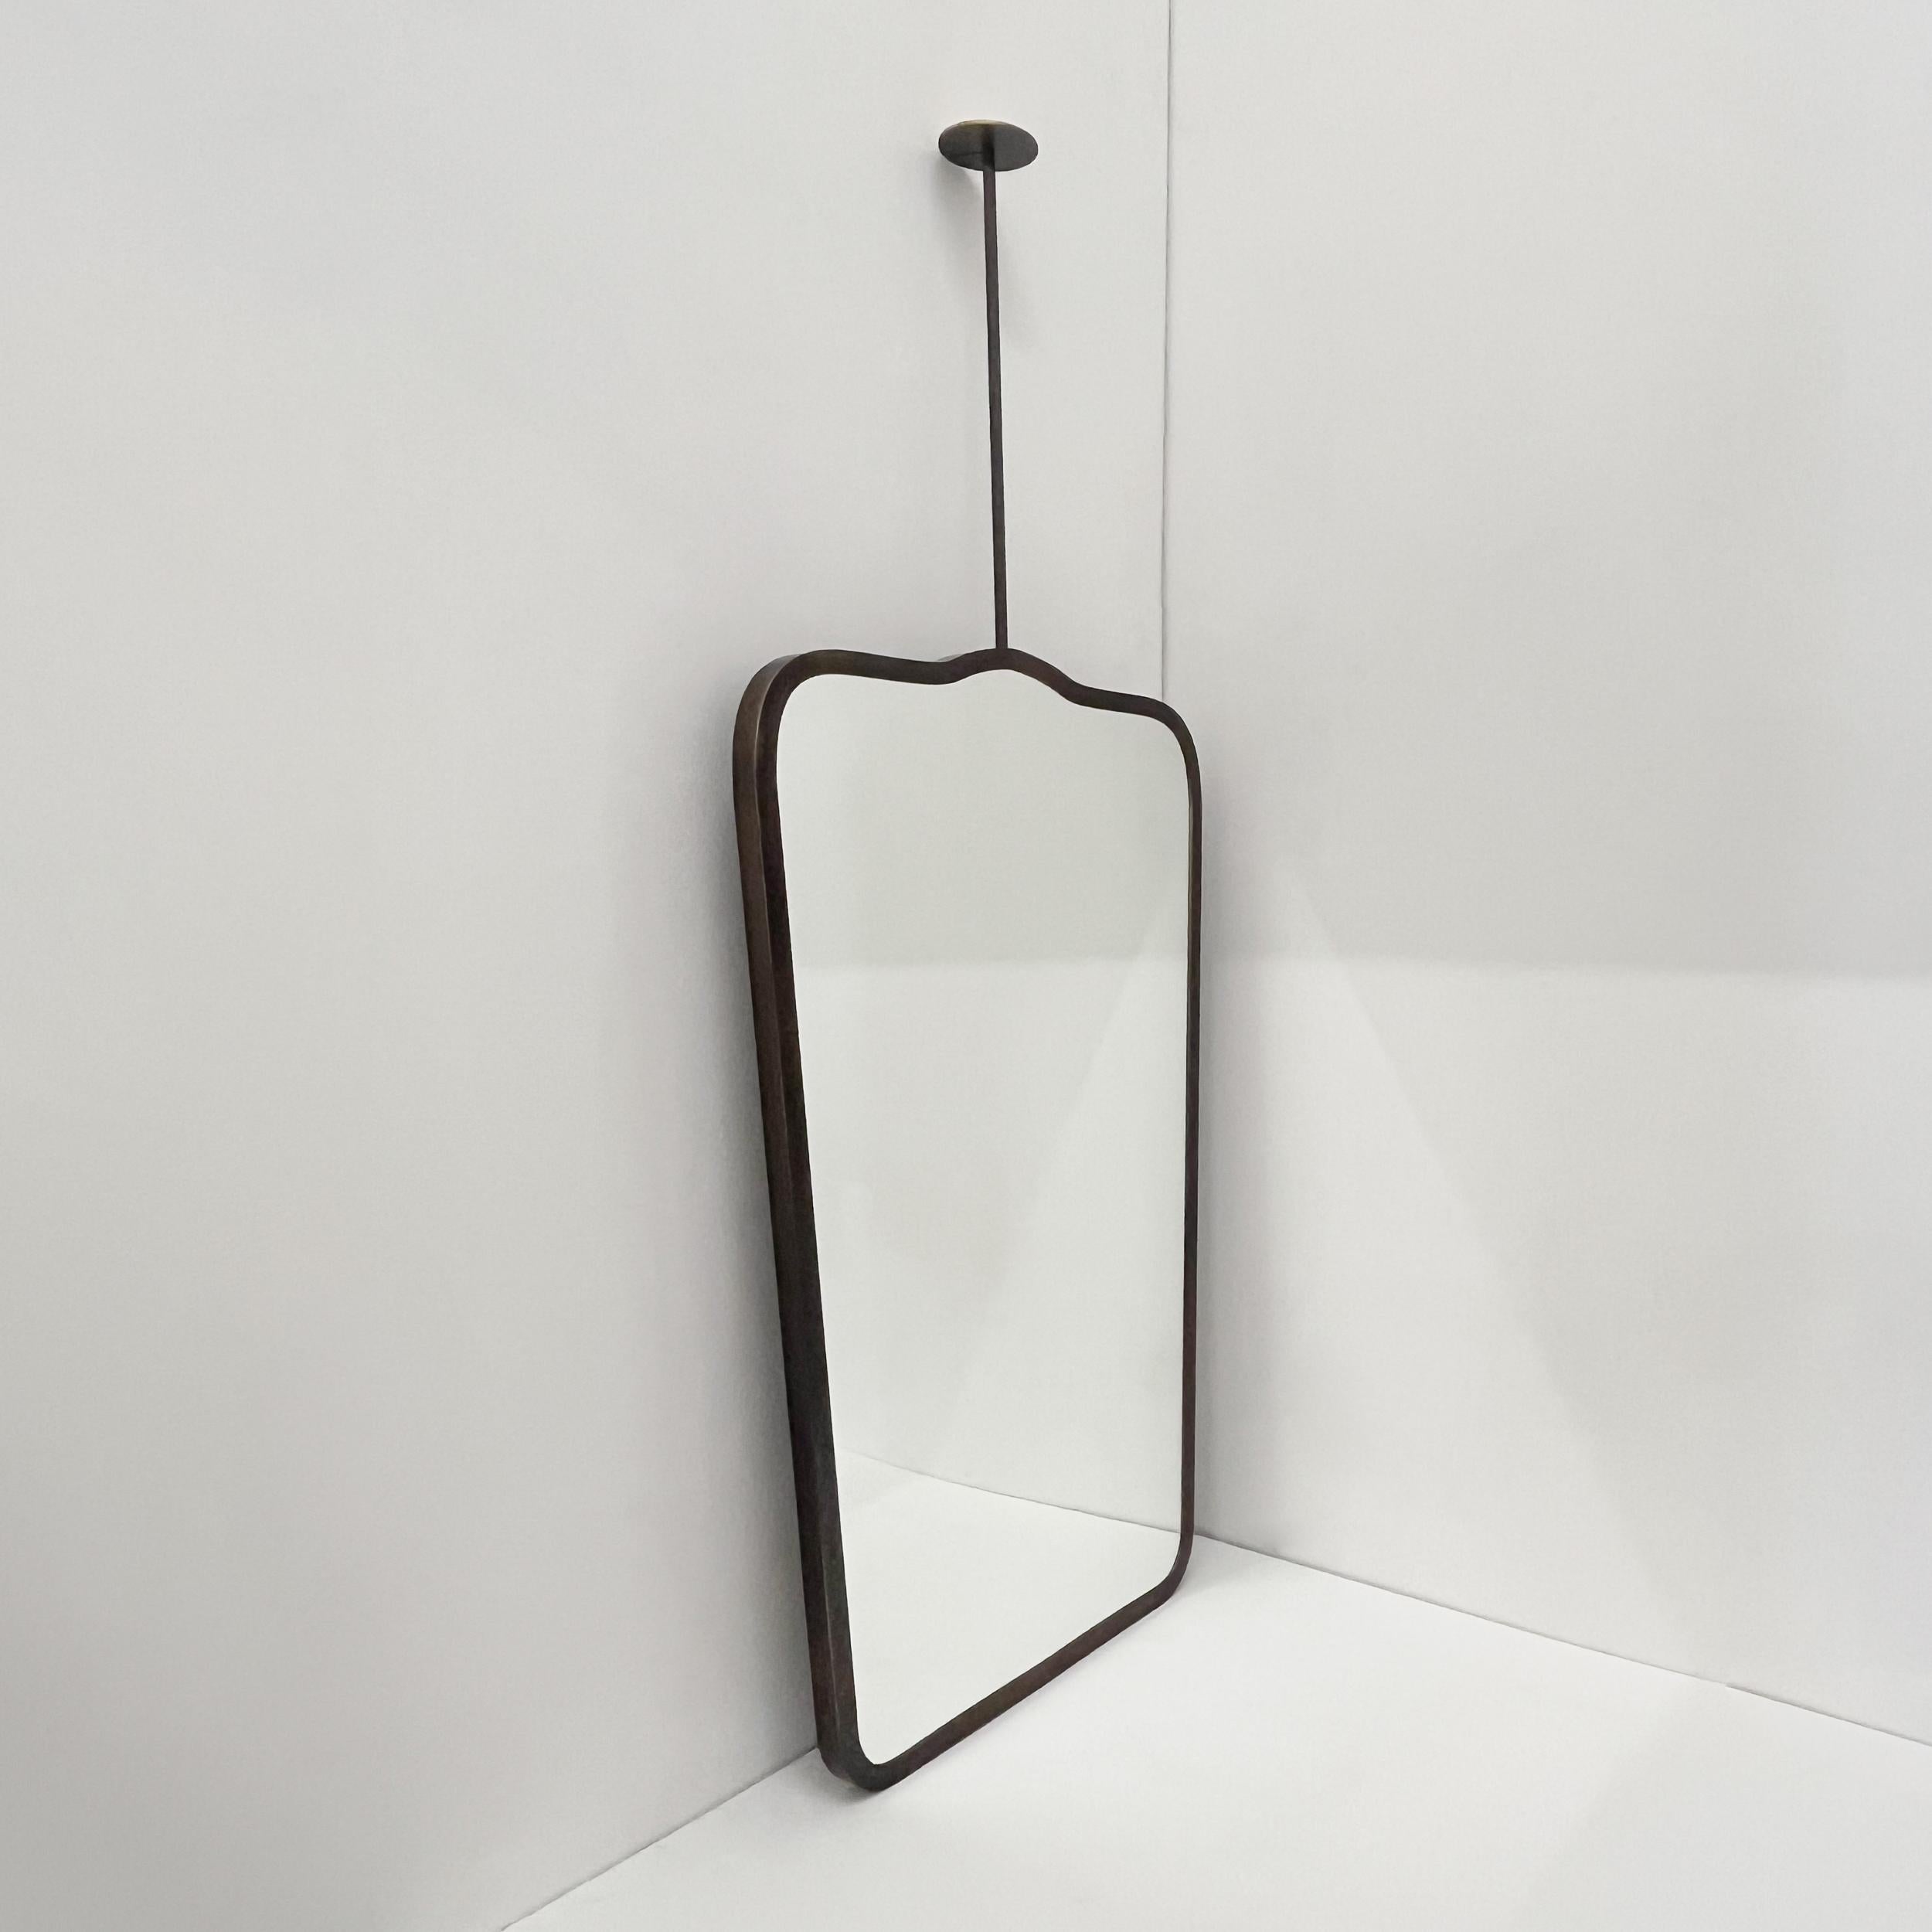 Available from stock.

Elegant ceiling suspended mirror with a high quality pure brass full frame with a bronze patina finish inspired by the celebrated work of Italian designer Gio Ponti. 

This piece is part of our original and fully customisable